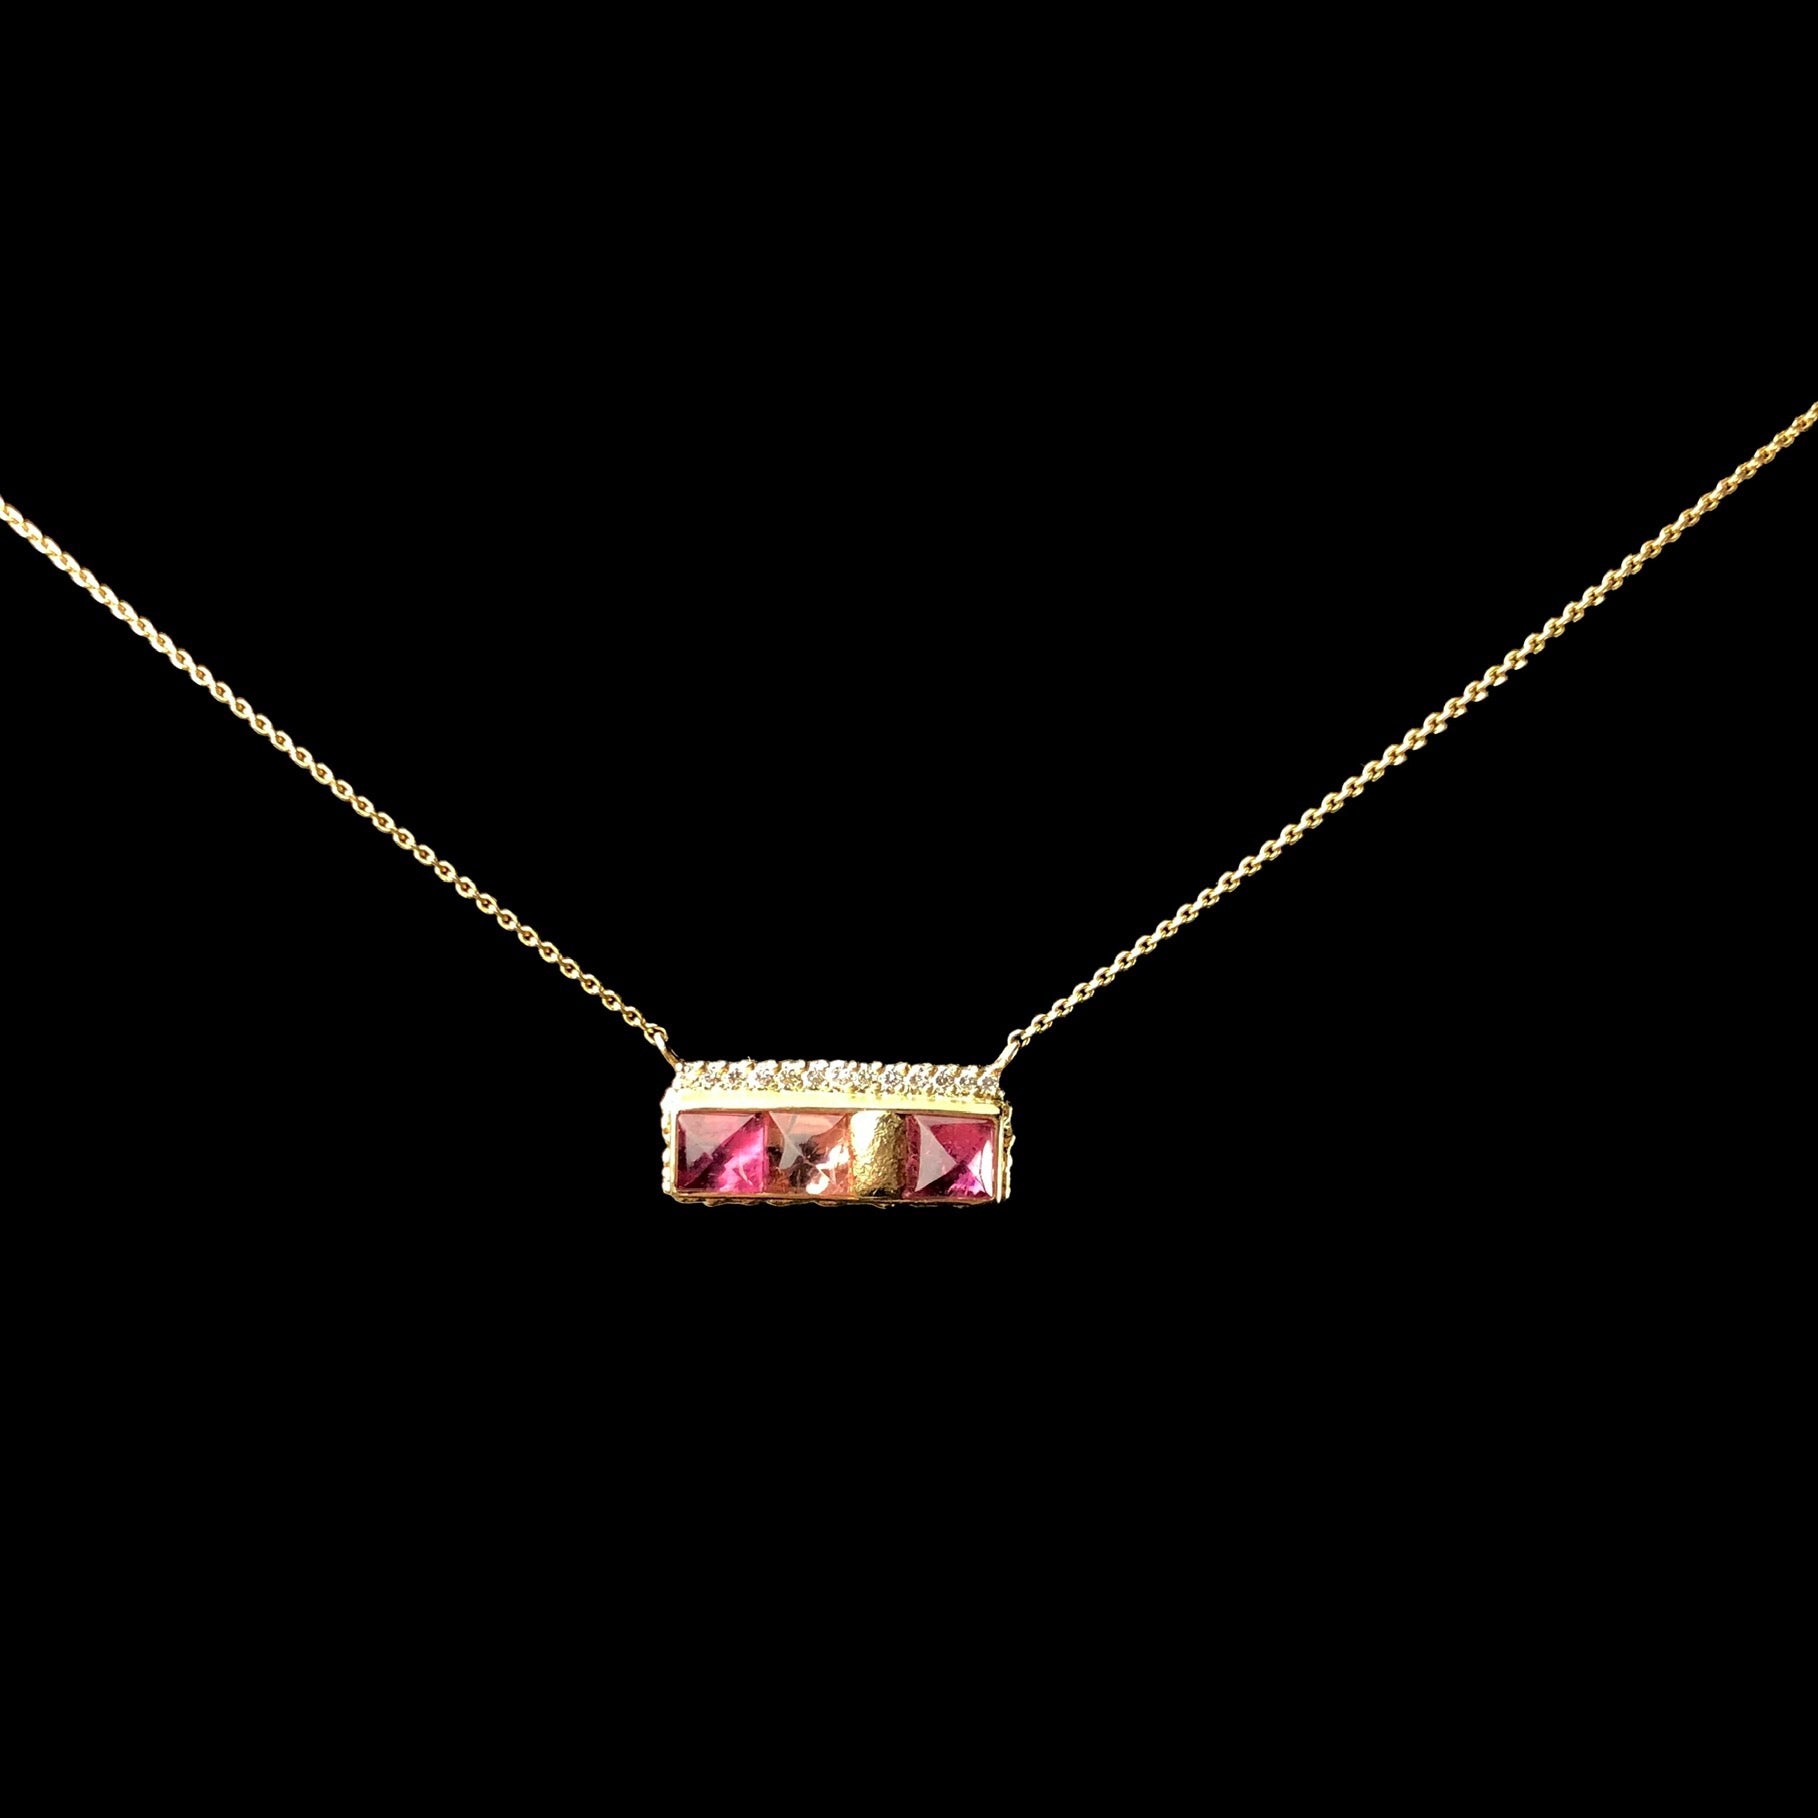 Three different hues of pink tourmaline stones glow in a ruffled gold setting on chain 